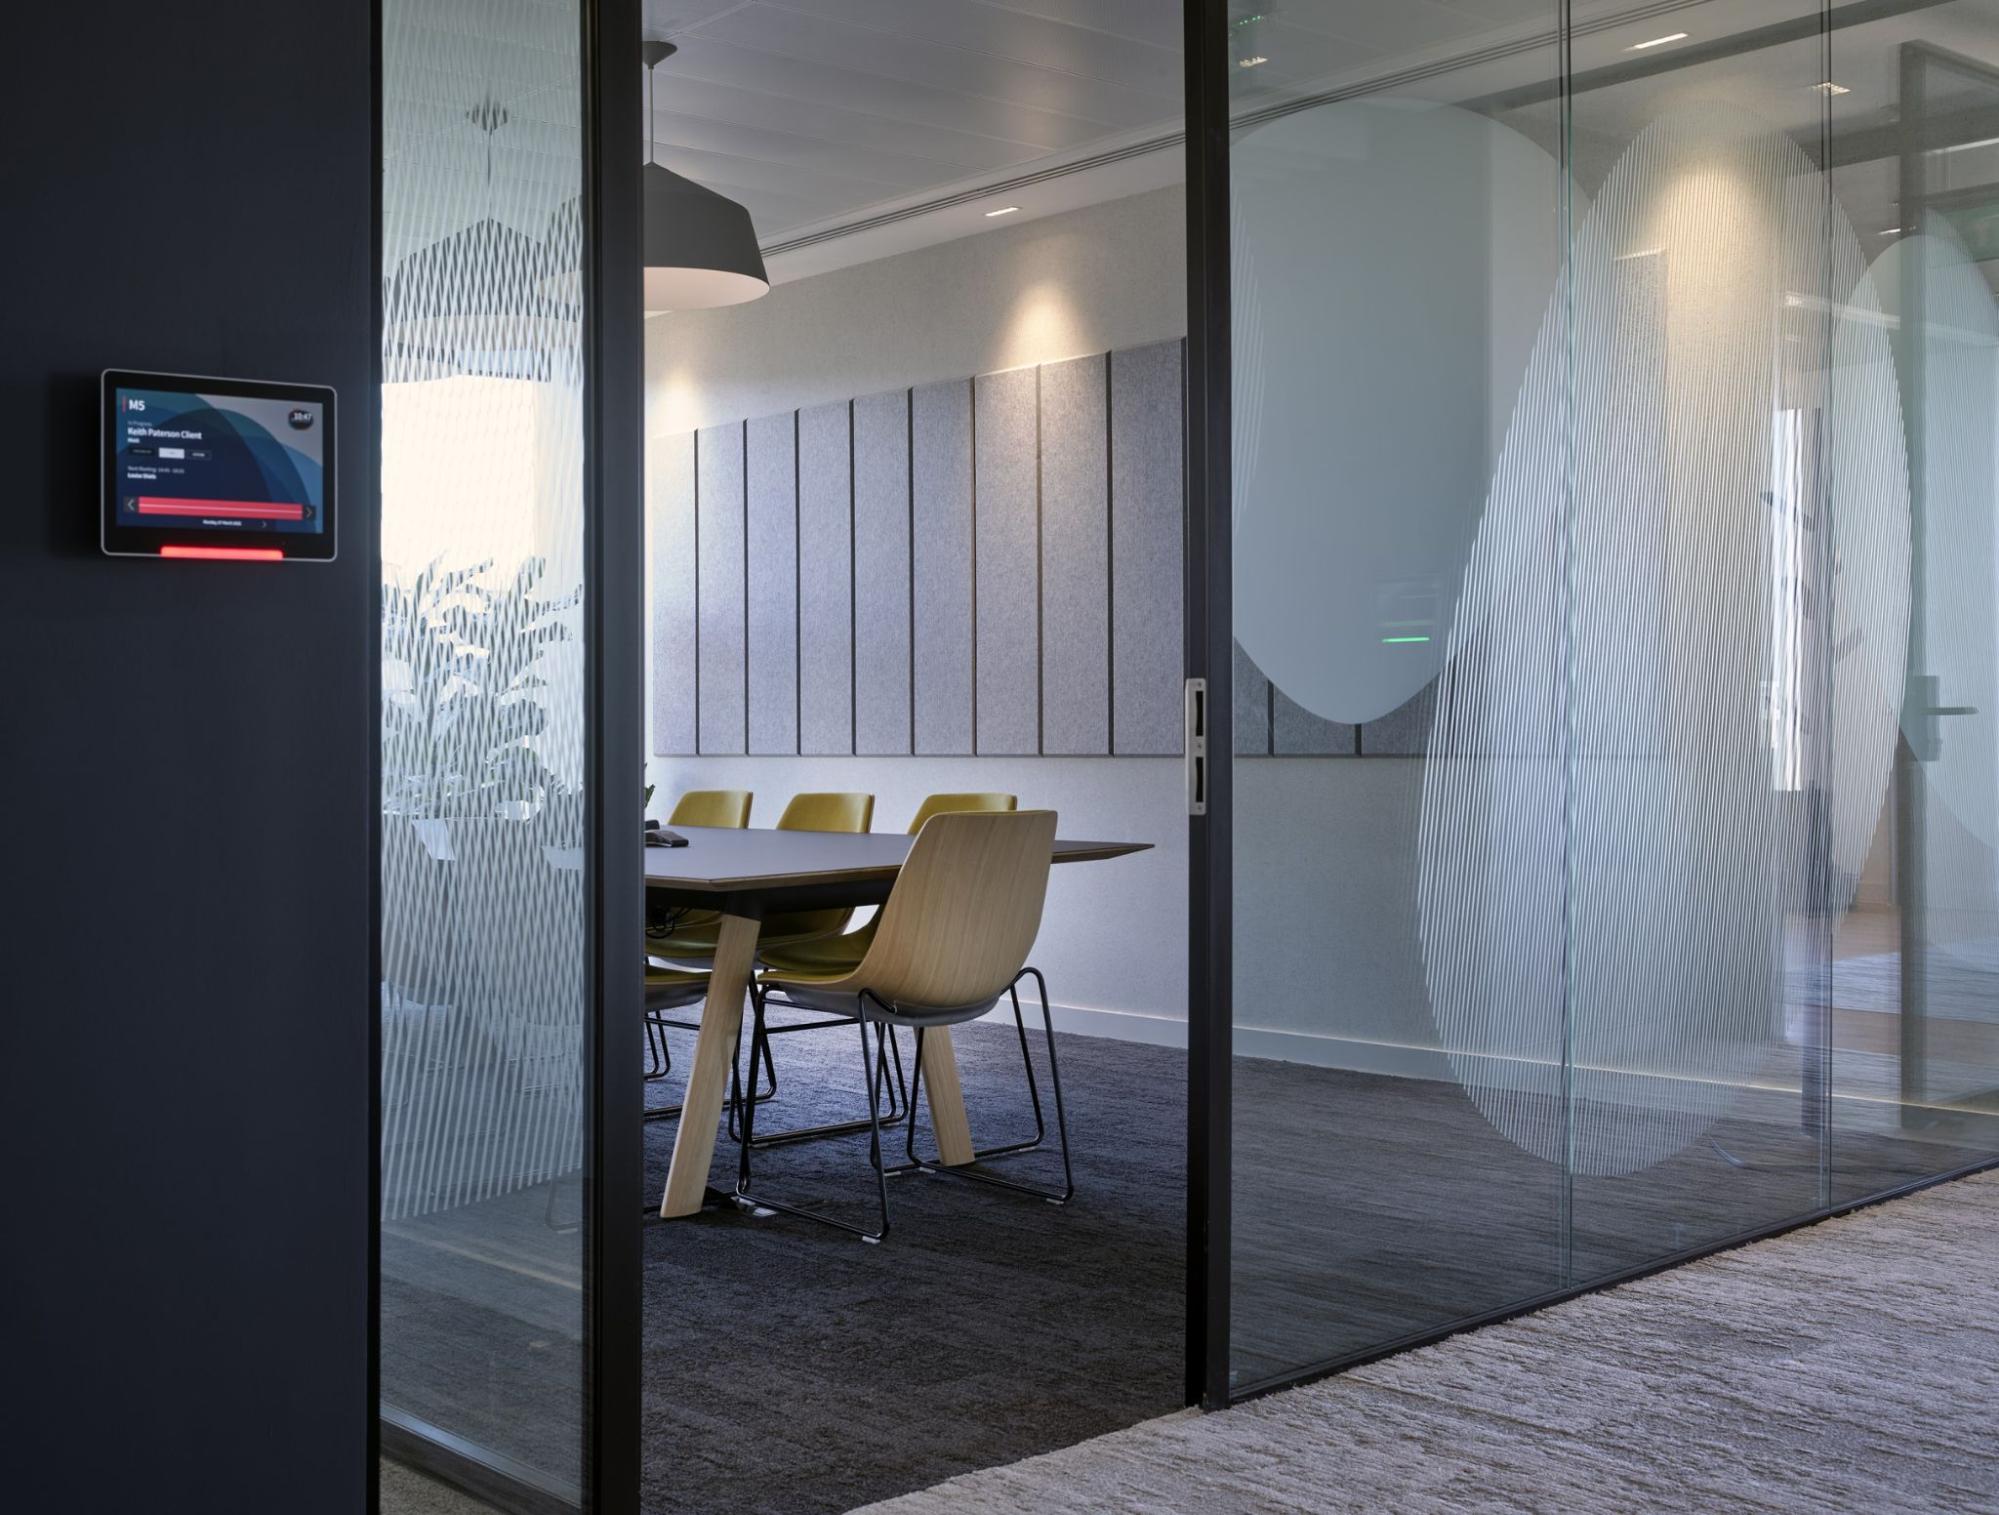 Where to Find the Best Demountable Architectural Glass Walls